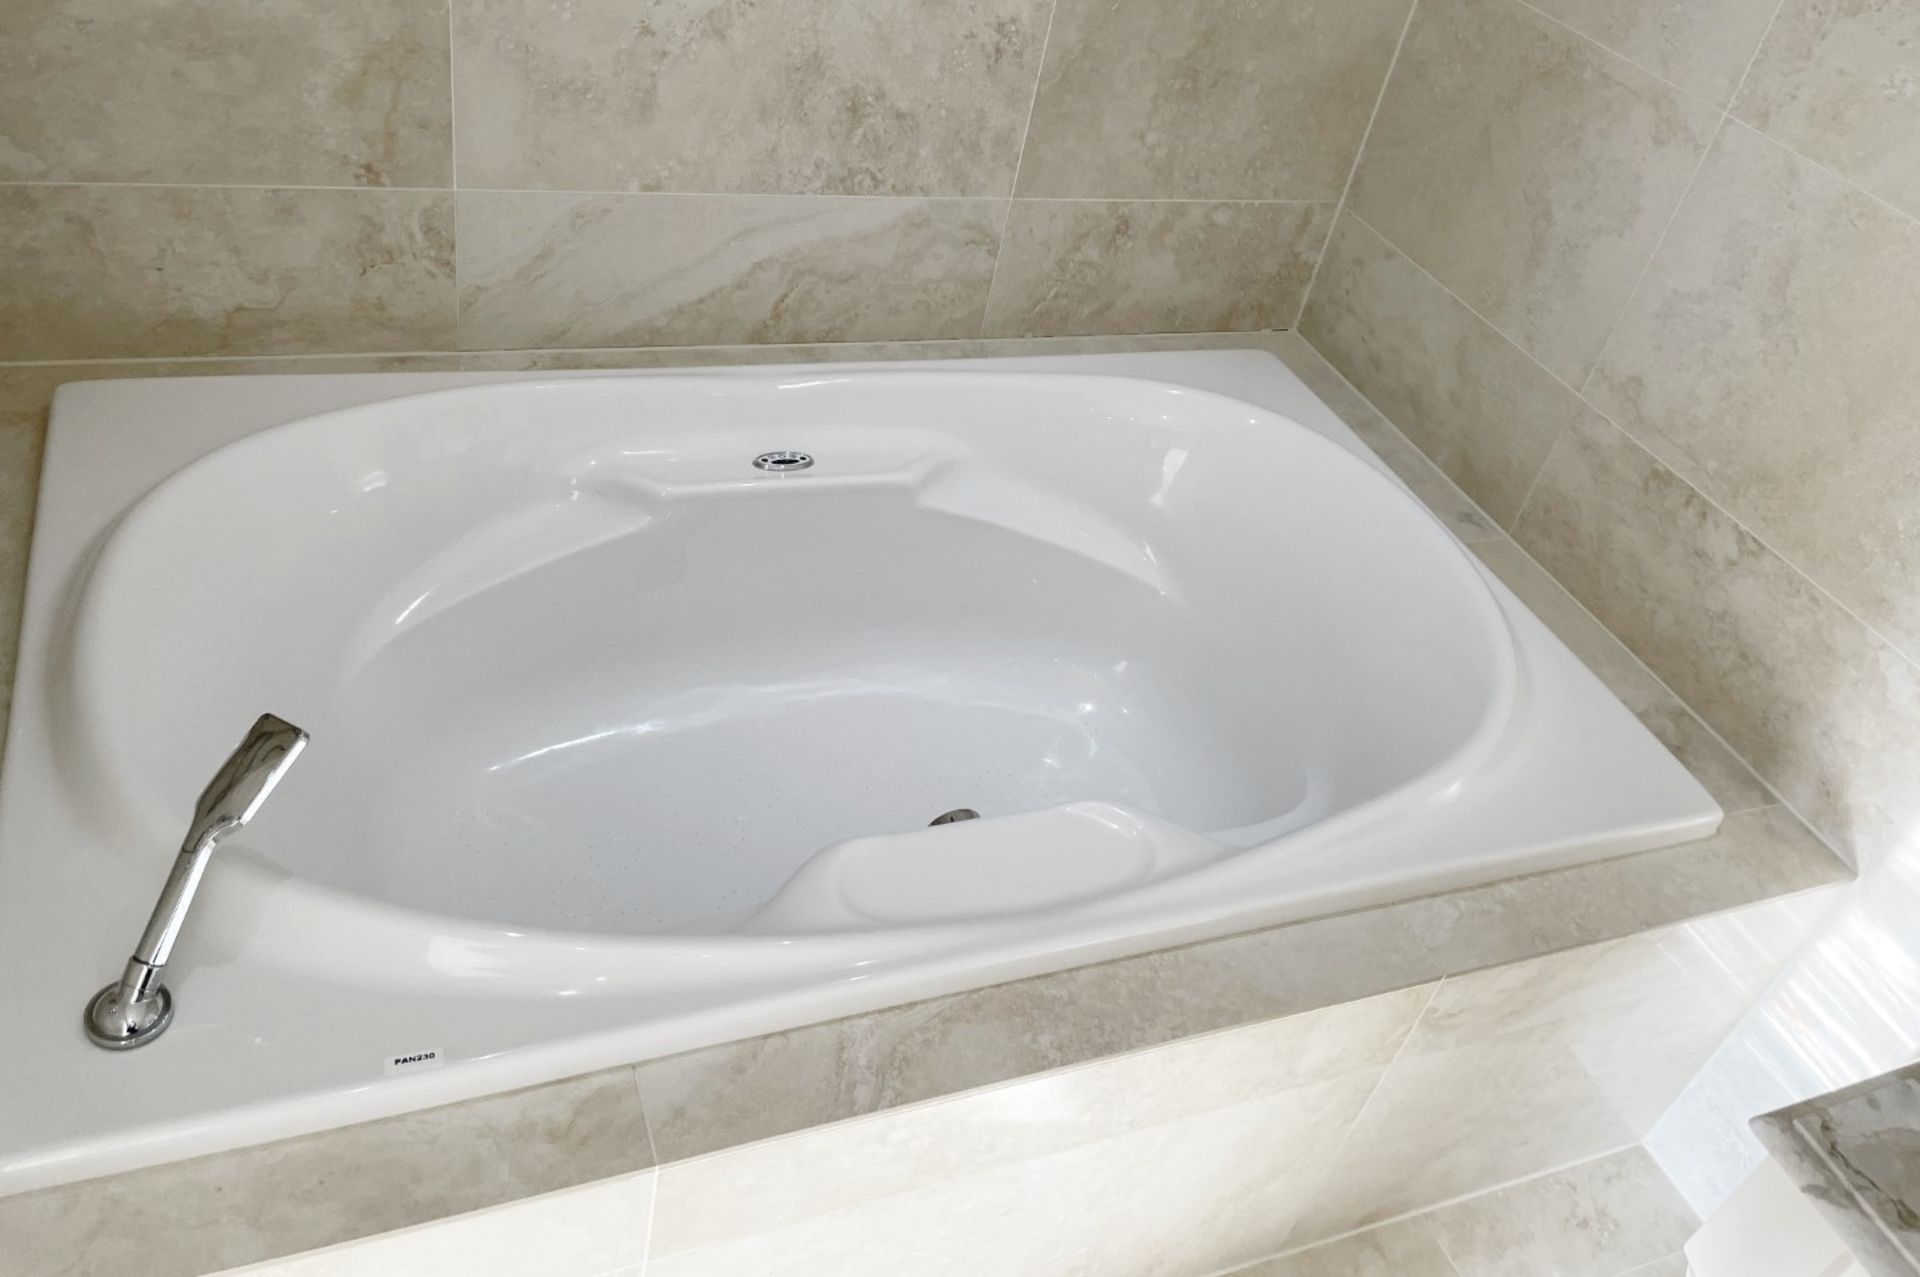 1 x AIRBATH Large Jacuzzi Spa Bath, with Axor Thermostat  - Ref: PAN230 Bed1/bth - CL896 - NO VAT - Image 8 of 20